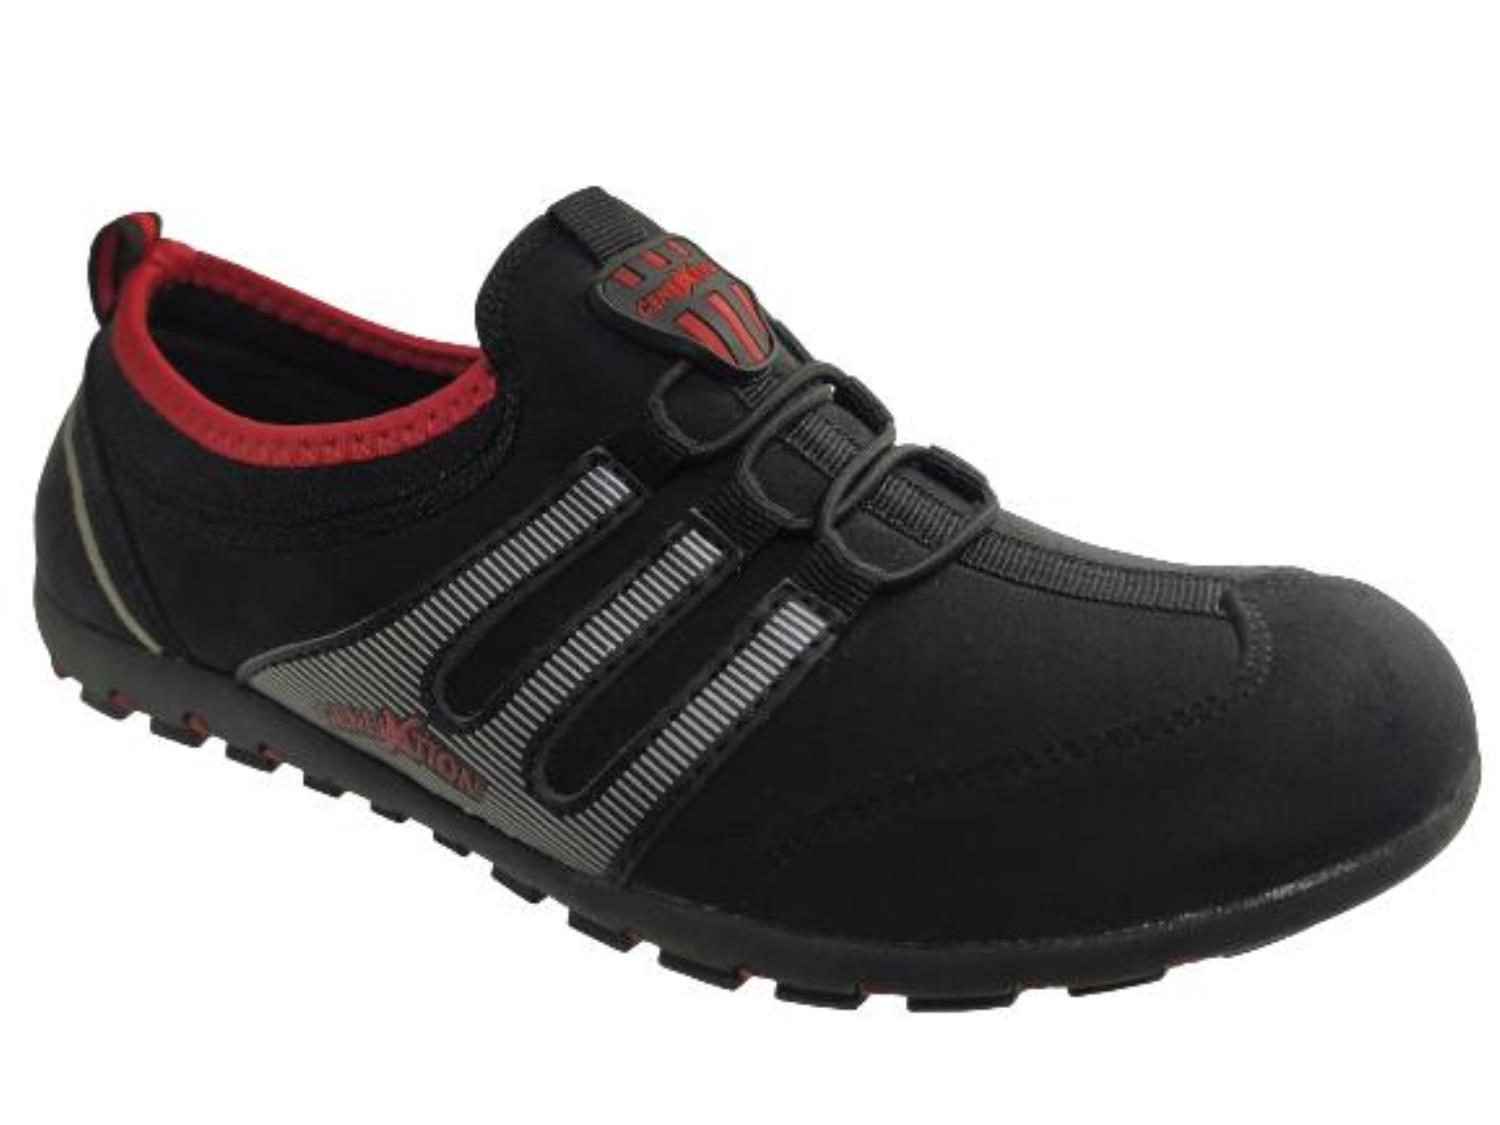 ALLY BELLY Boys Girls Walking Shoes Comfortable Nepal | Ubuy